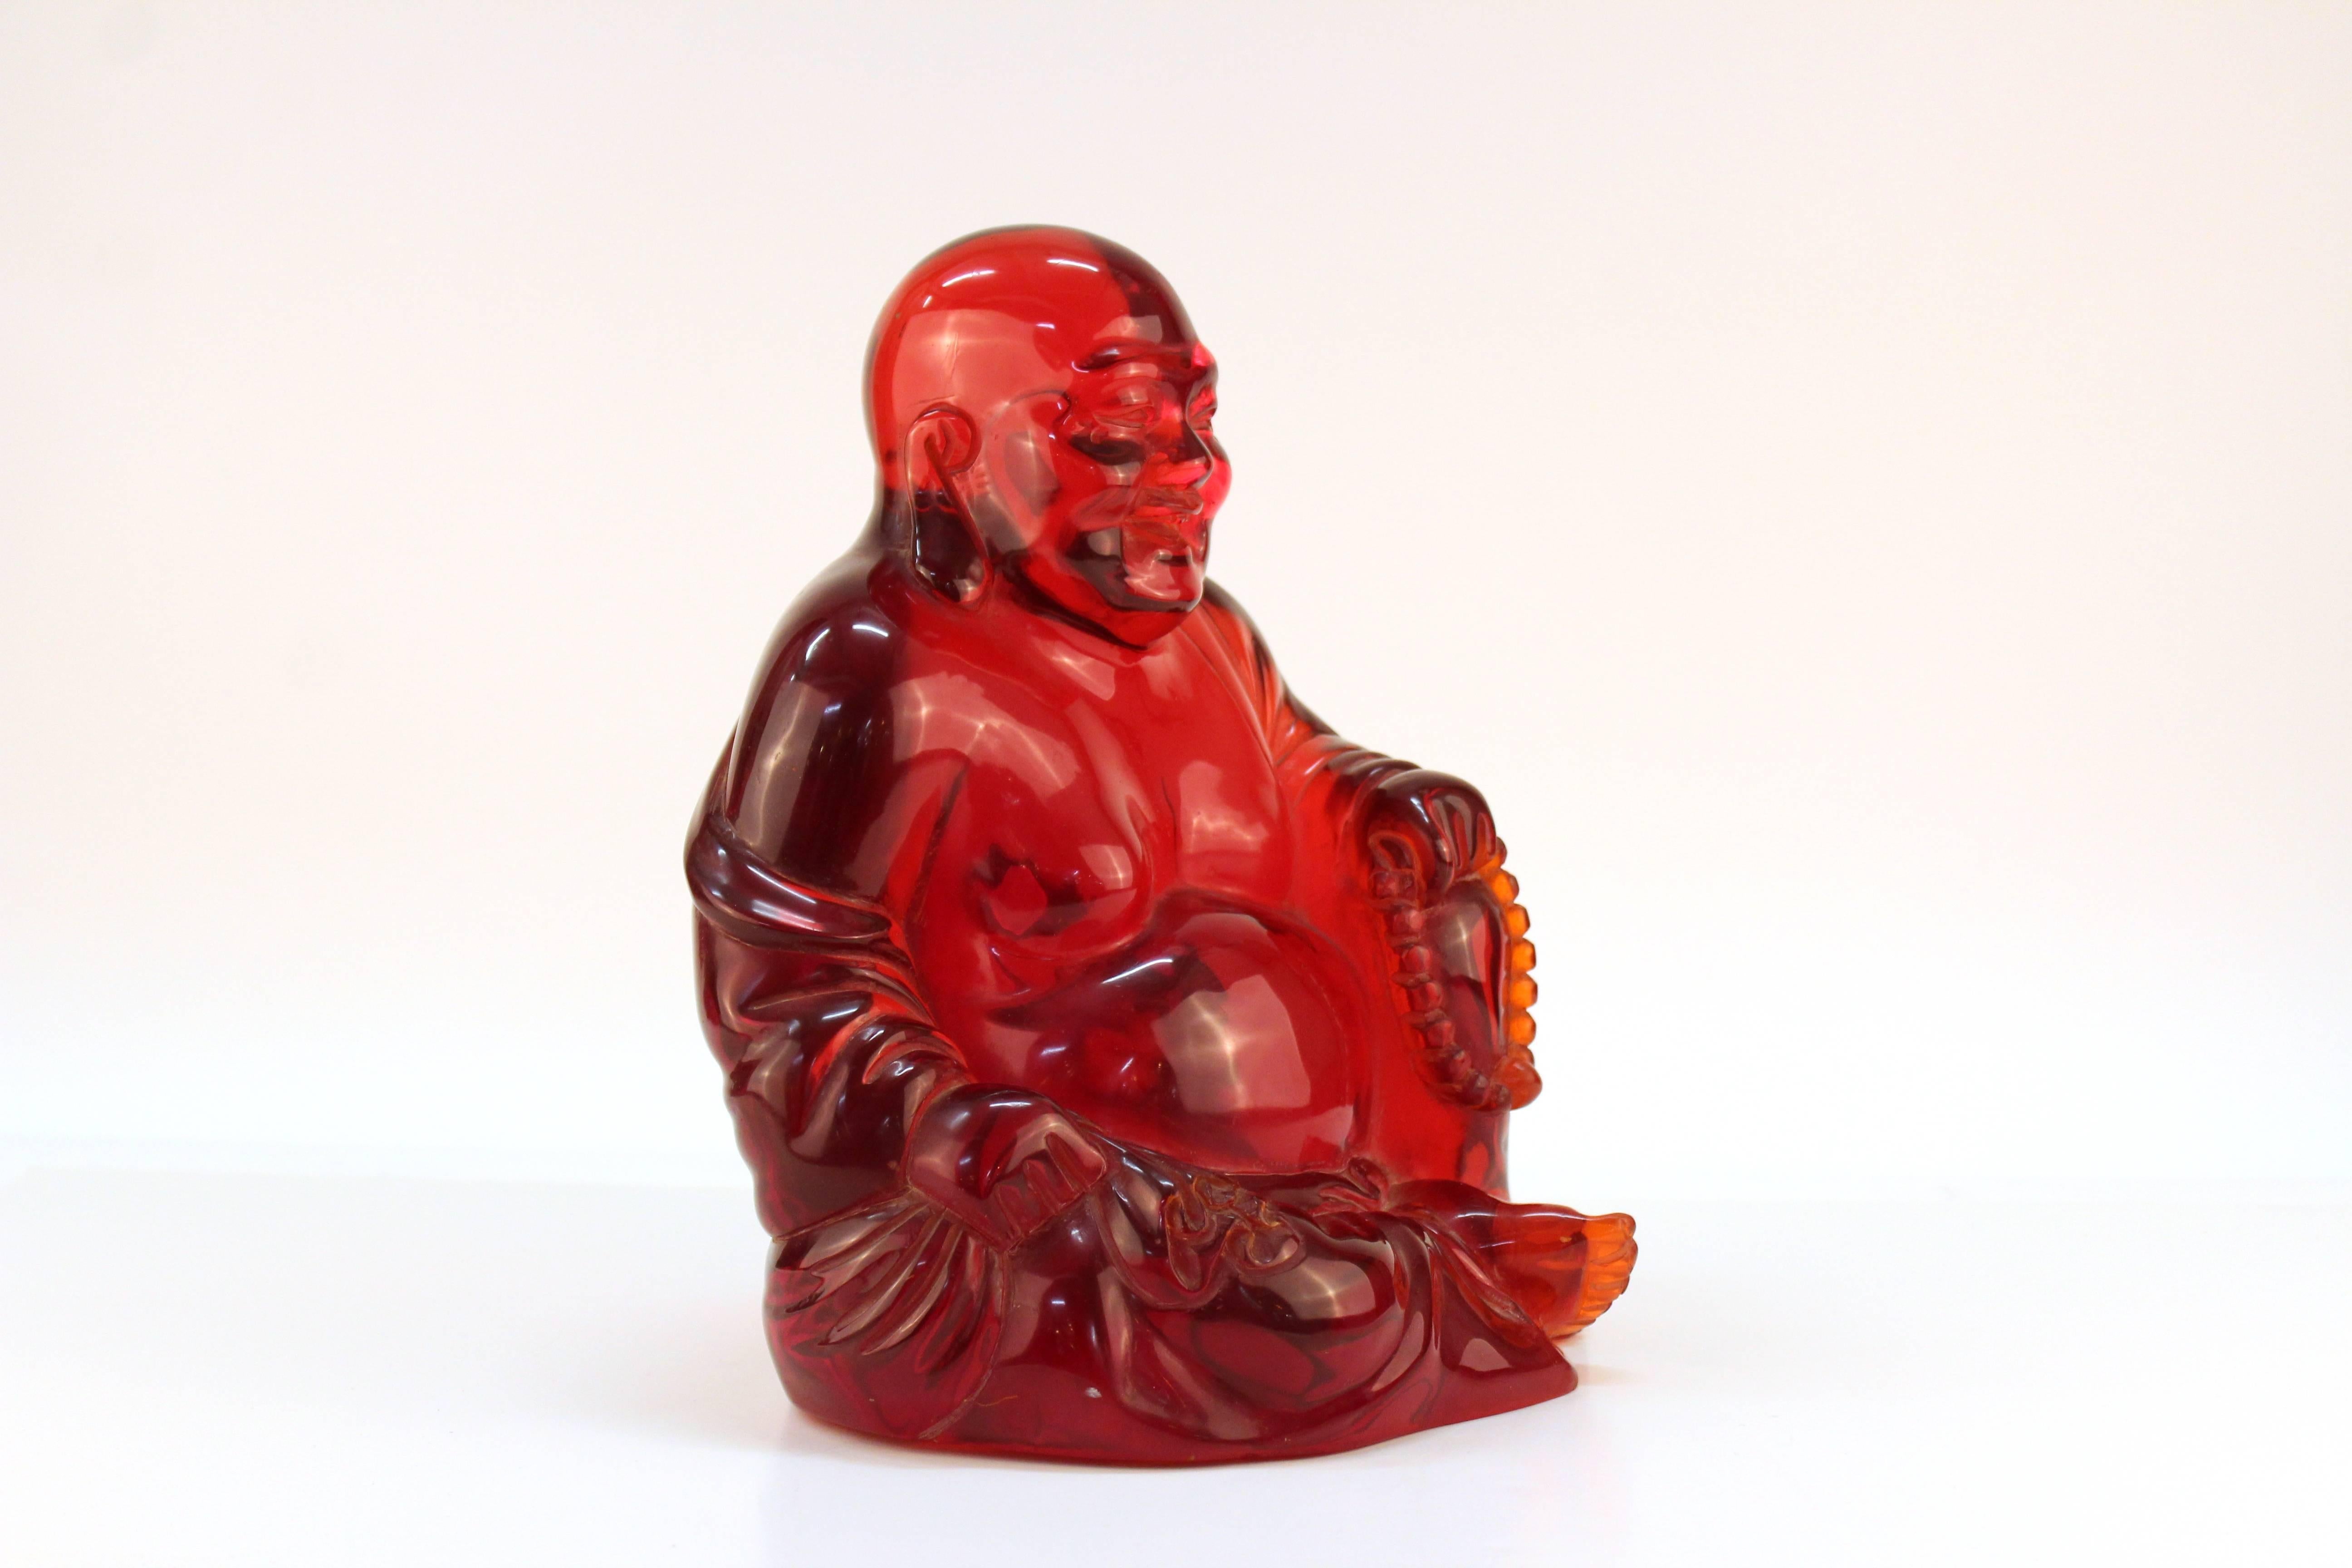 A Mid-Century Modern sculpture of Buddha rendered in translucent bright red resin. In very good condition.